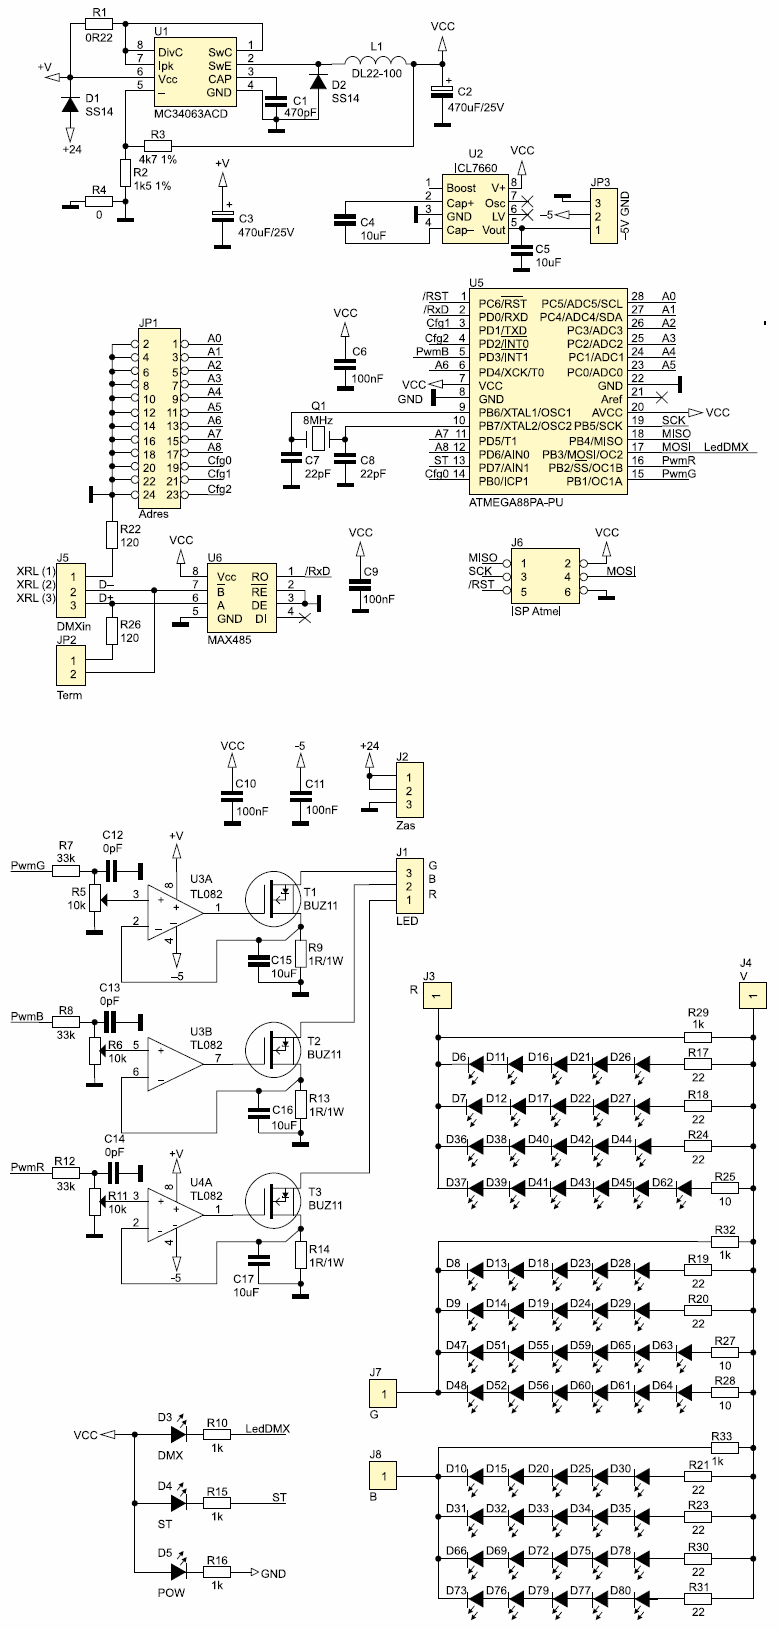 schematic-diagram-rgb-lamp-with-the-dmx-interface